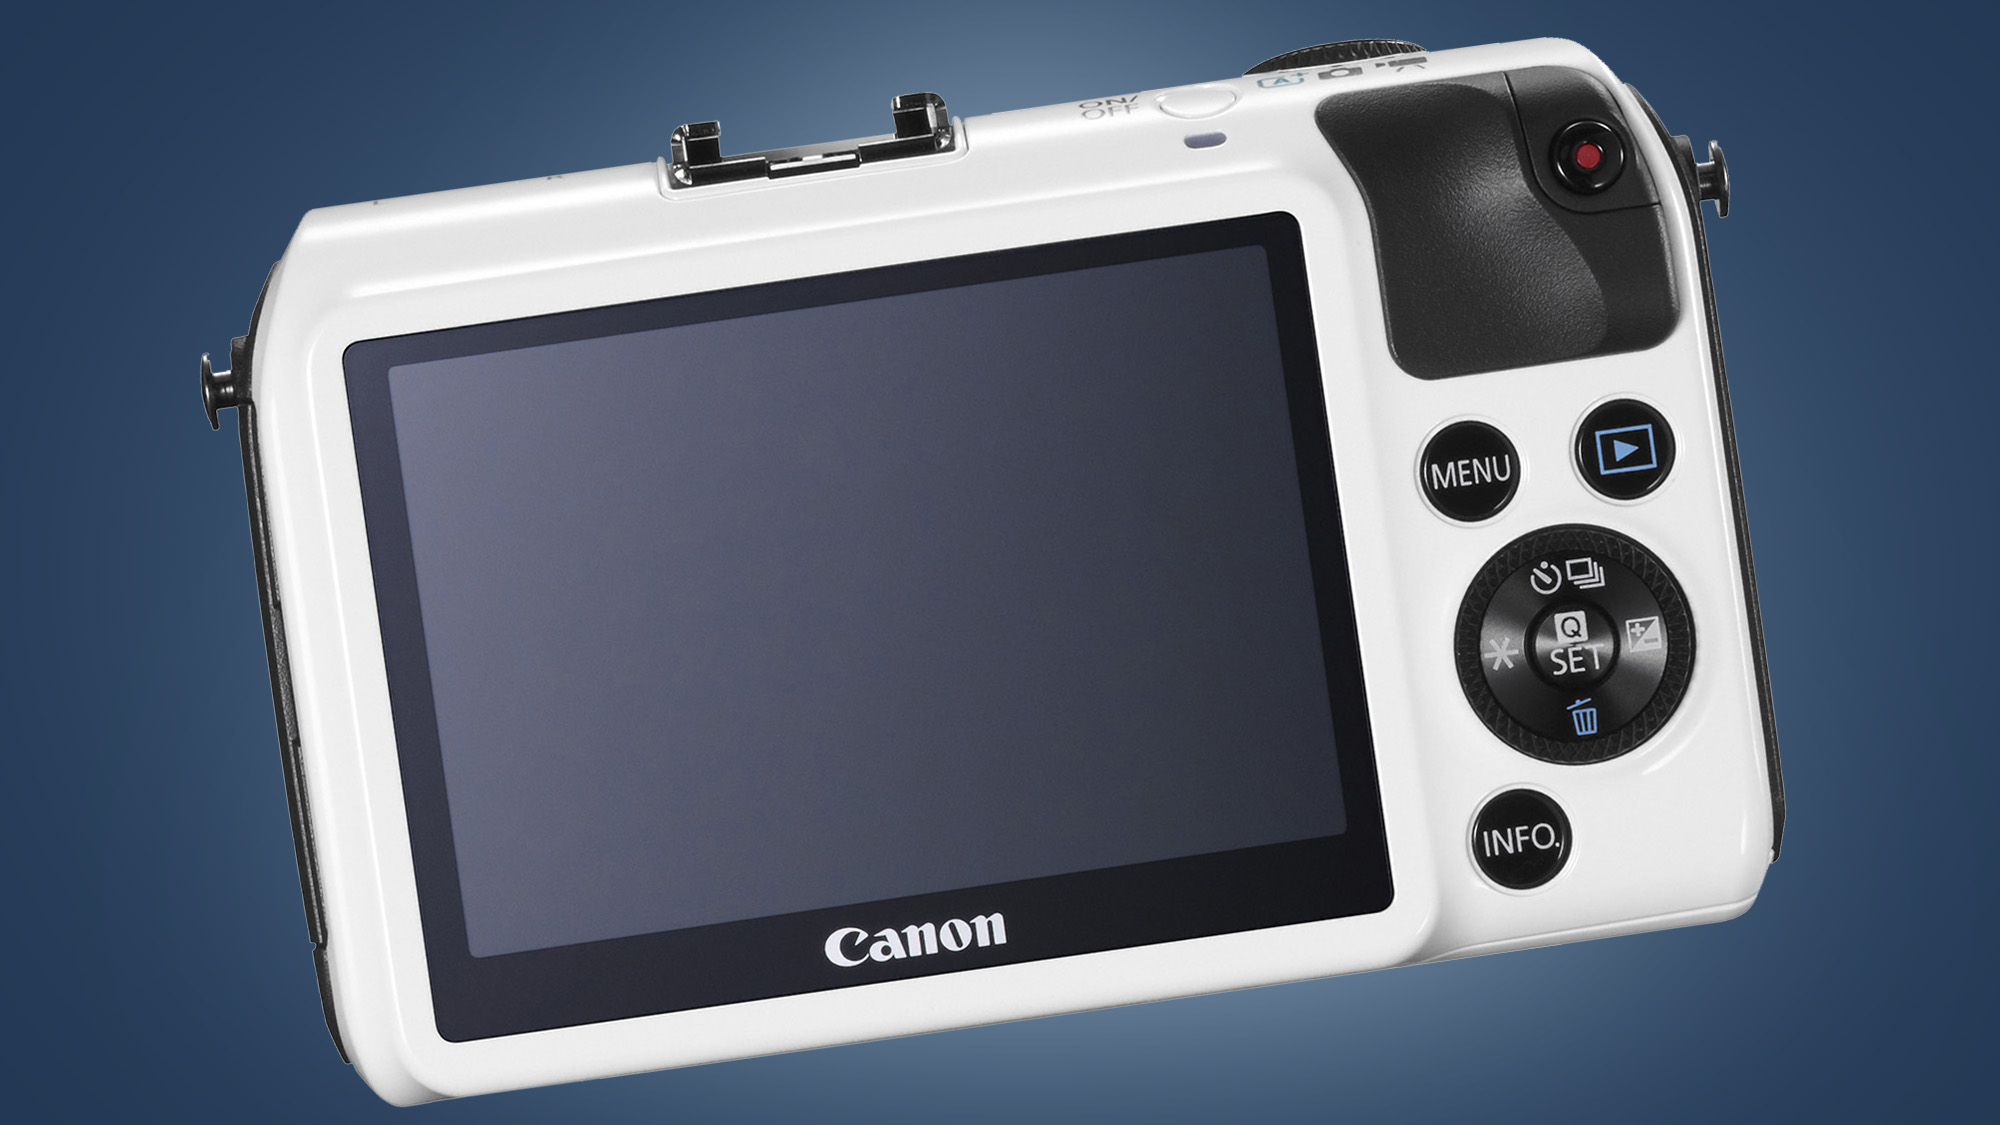 The back of the Canon EOS M camera